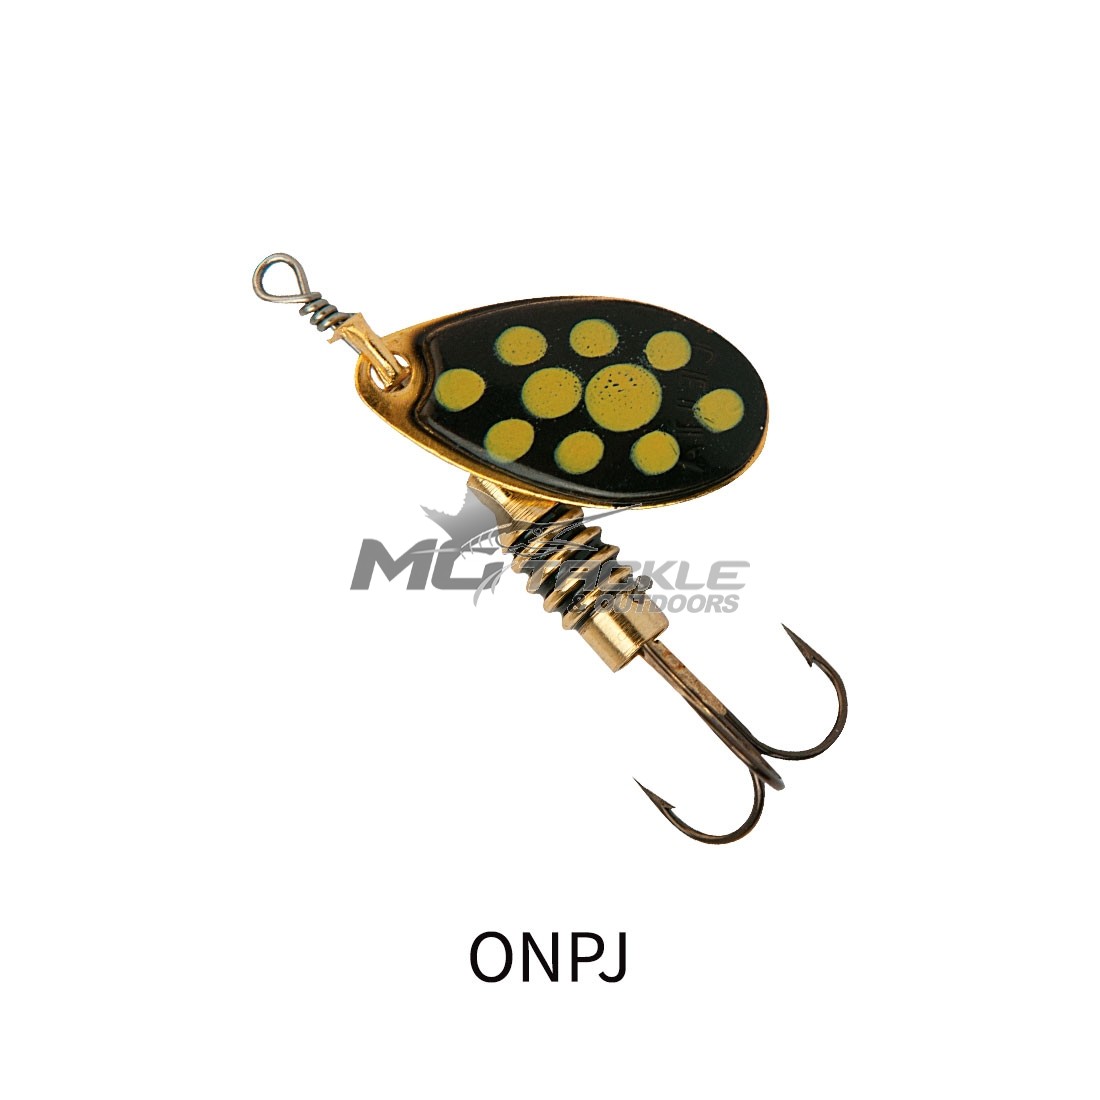 2 Pack of Size 1 Rublex Celta Inline Spinner Lure - 2gm Spinnerbait Fishing  Lure - Gold Black Yellow